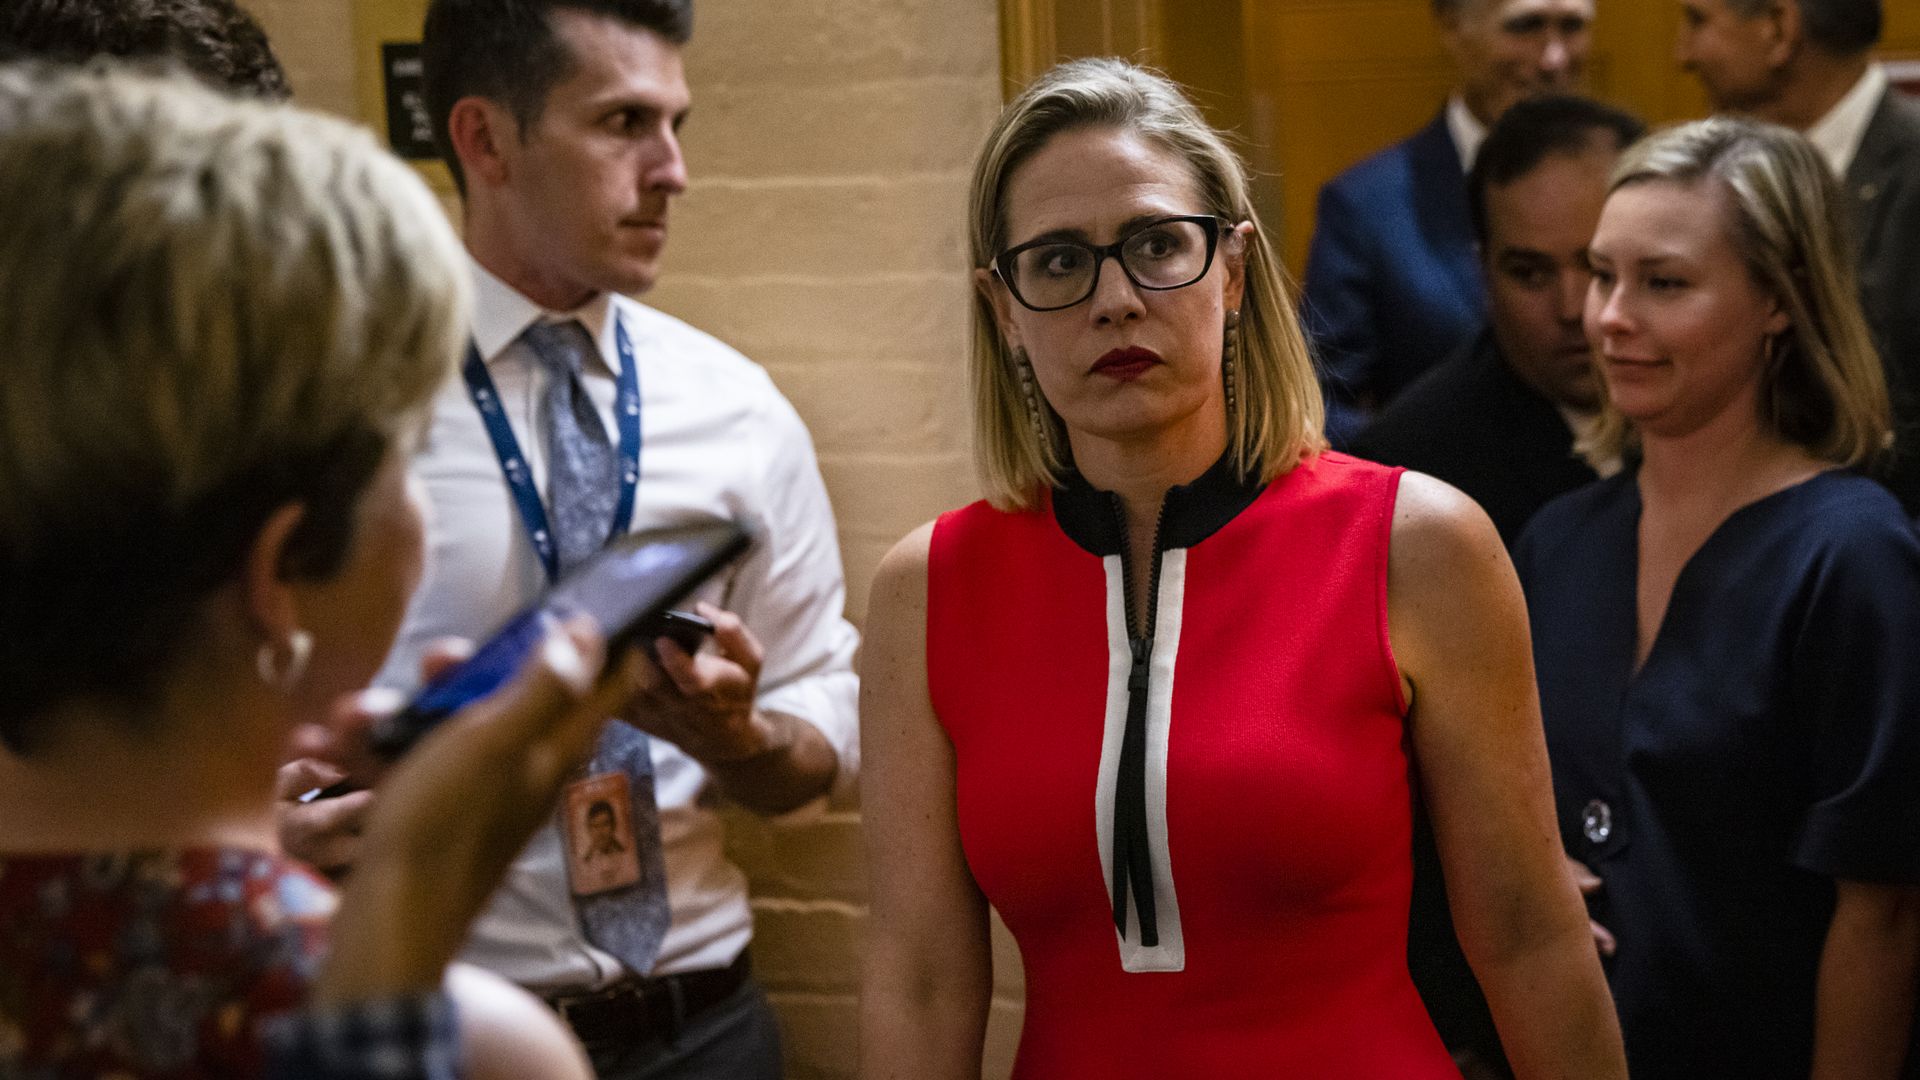 Sen. Kirsten Sinema (D-AZ) heads back to a bipartisan meeting on infrastructure in the basement of the U.S. Capitol building